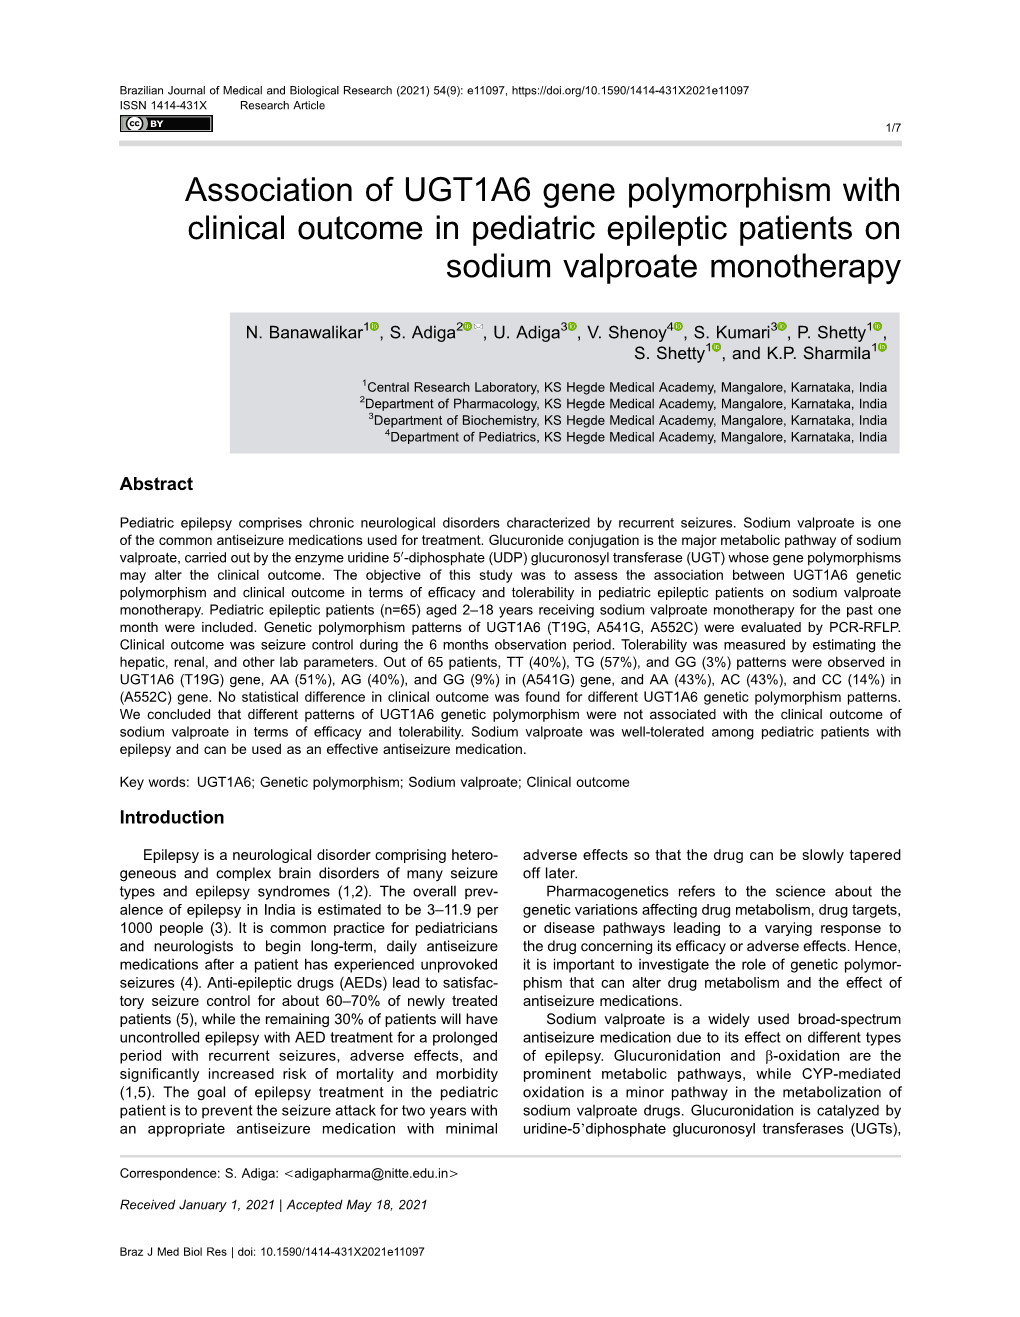 Association of UGT1A6 Gene Polymorphism with Clinical Outcome in Pediatric Epileptic Patients on Sodium Valproate Monotherapy